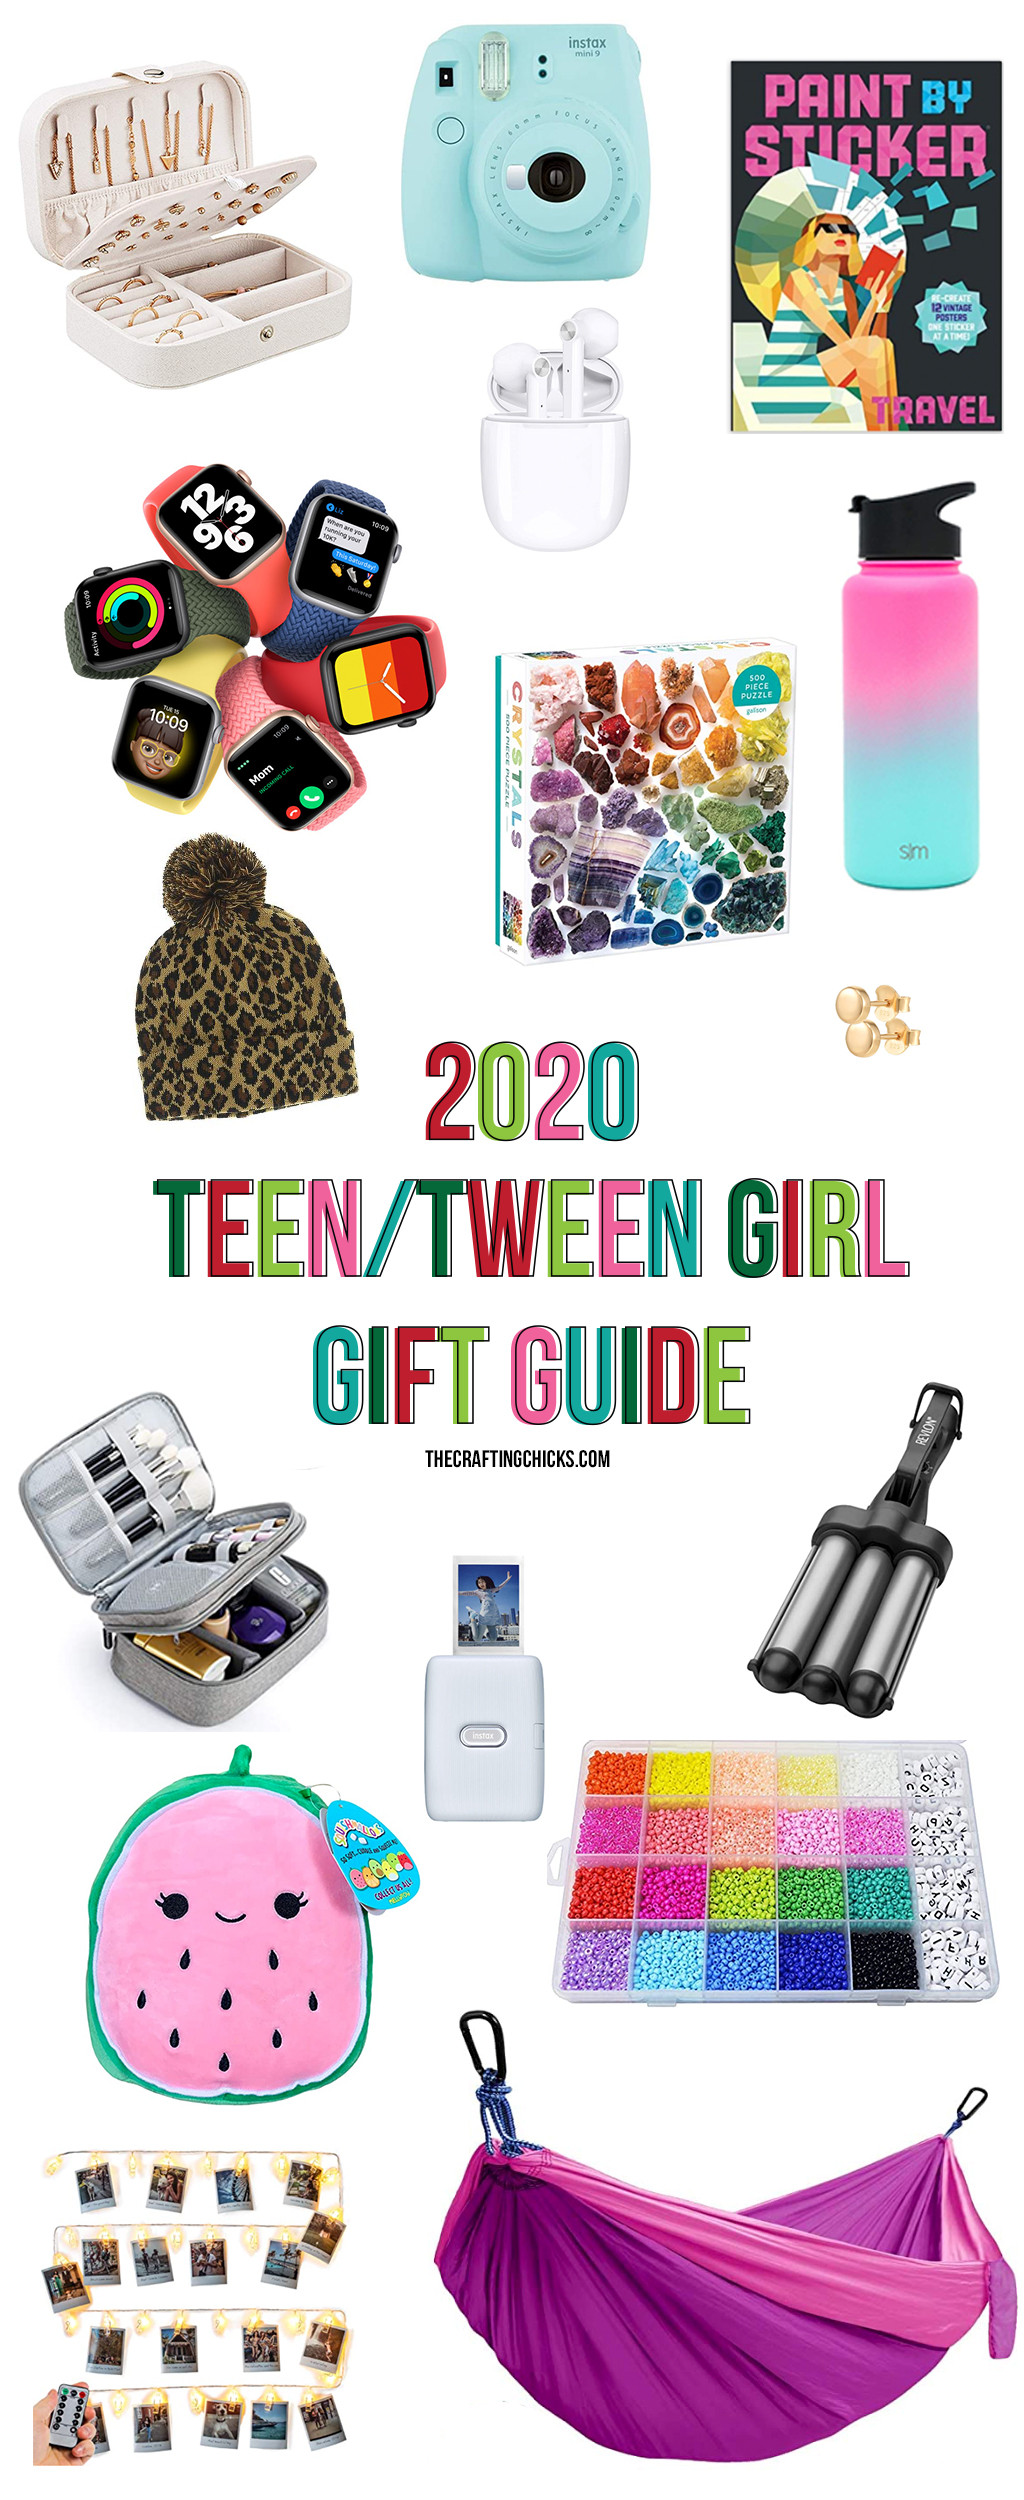 Girlfriend Gift Ideas 2020
 2020 Gift Guide for Teen and Tween Girls The Crafting Chicks